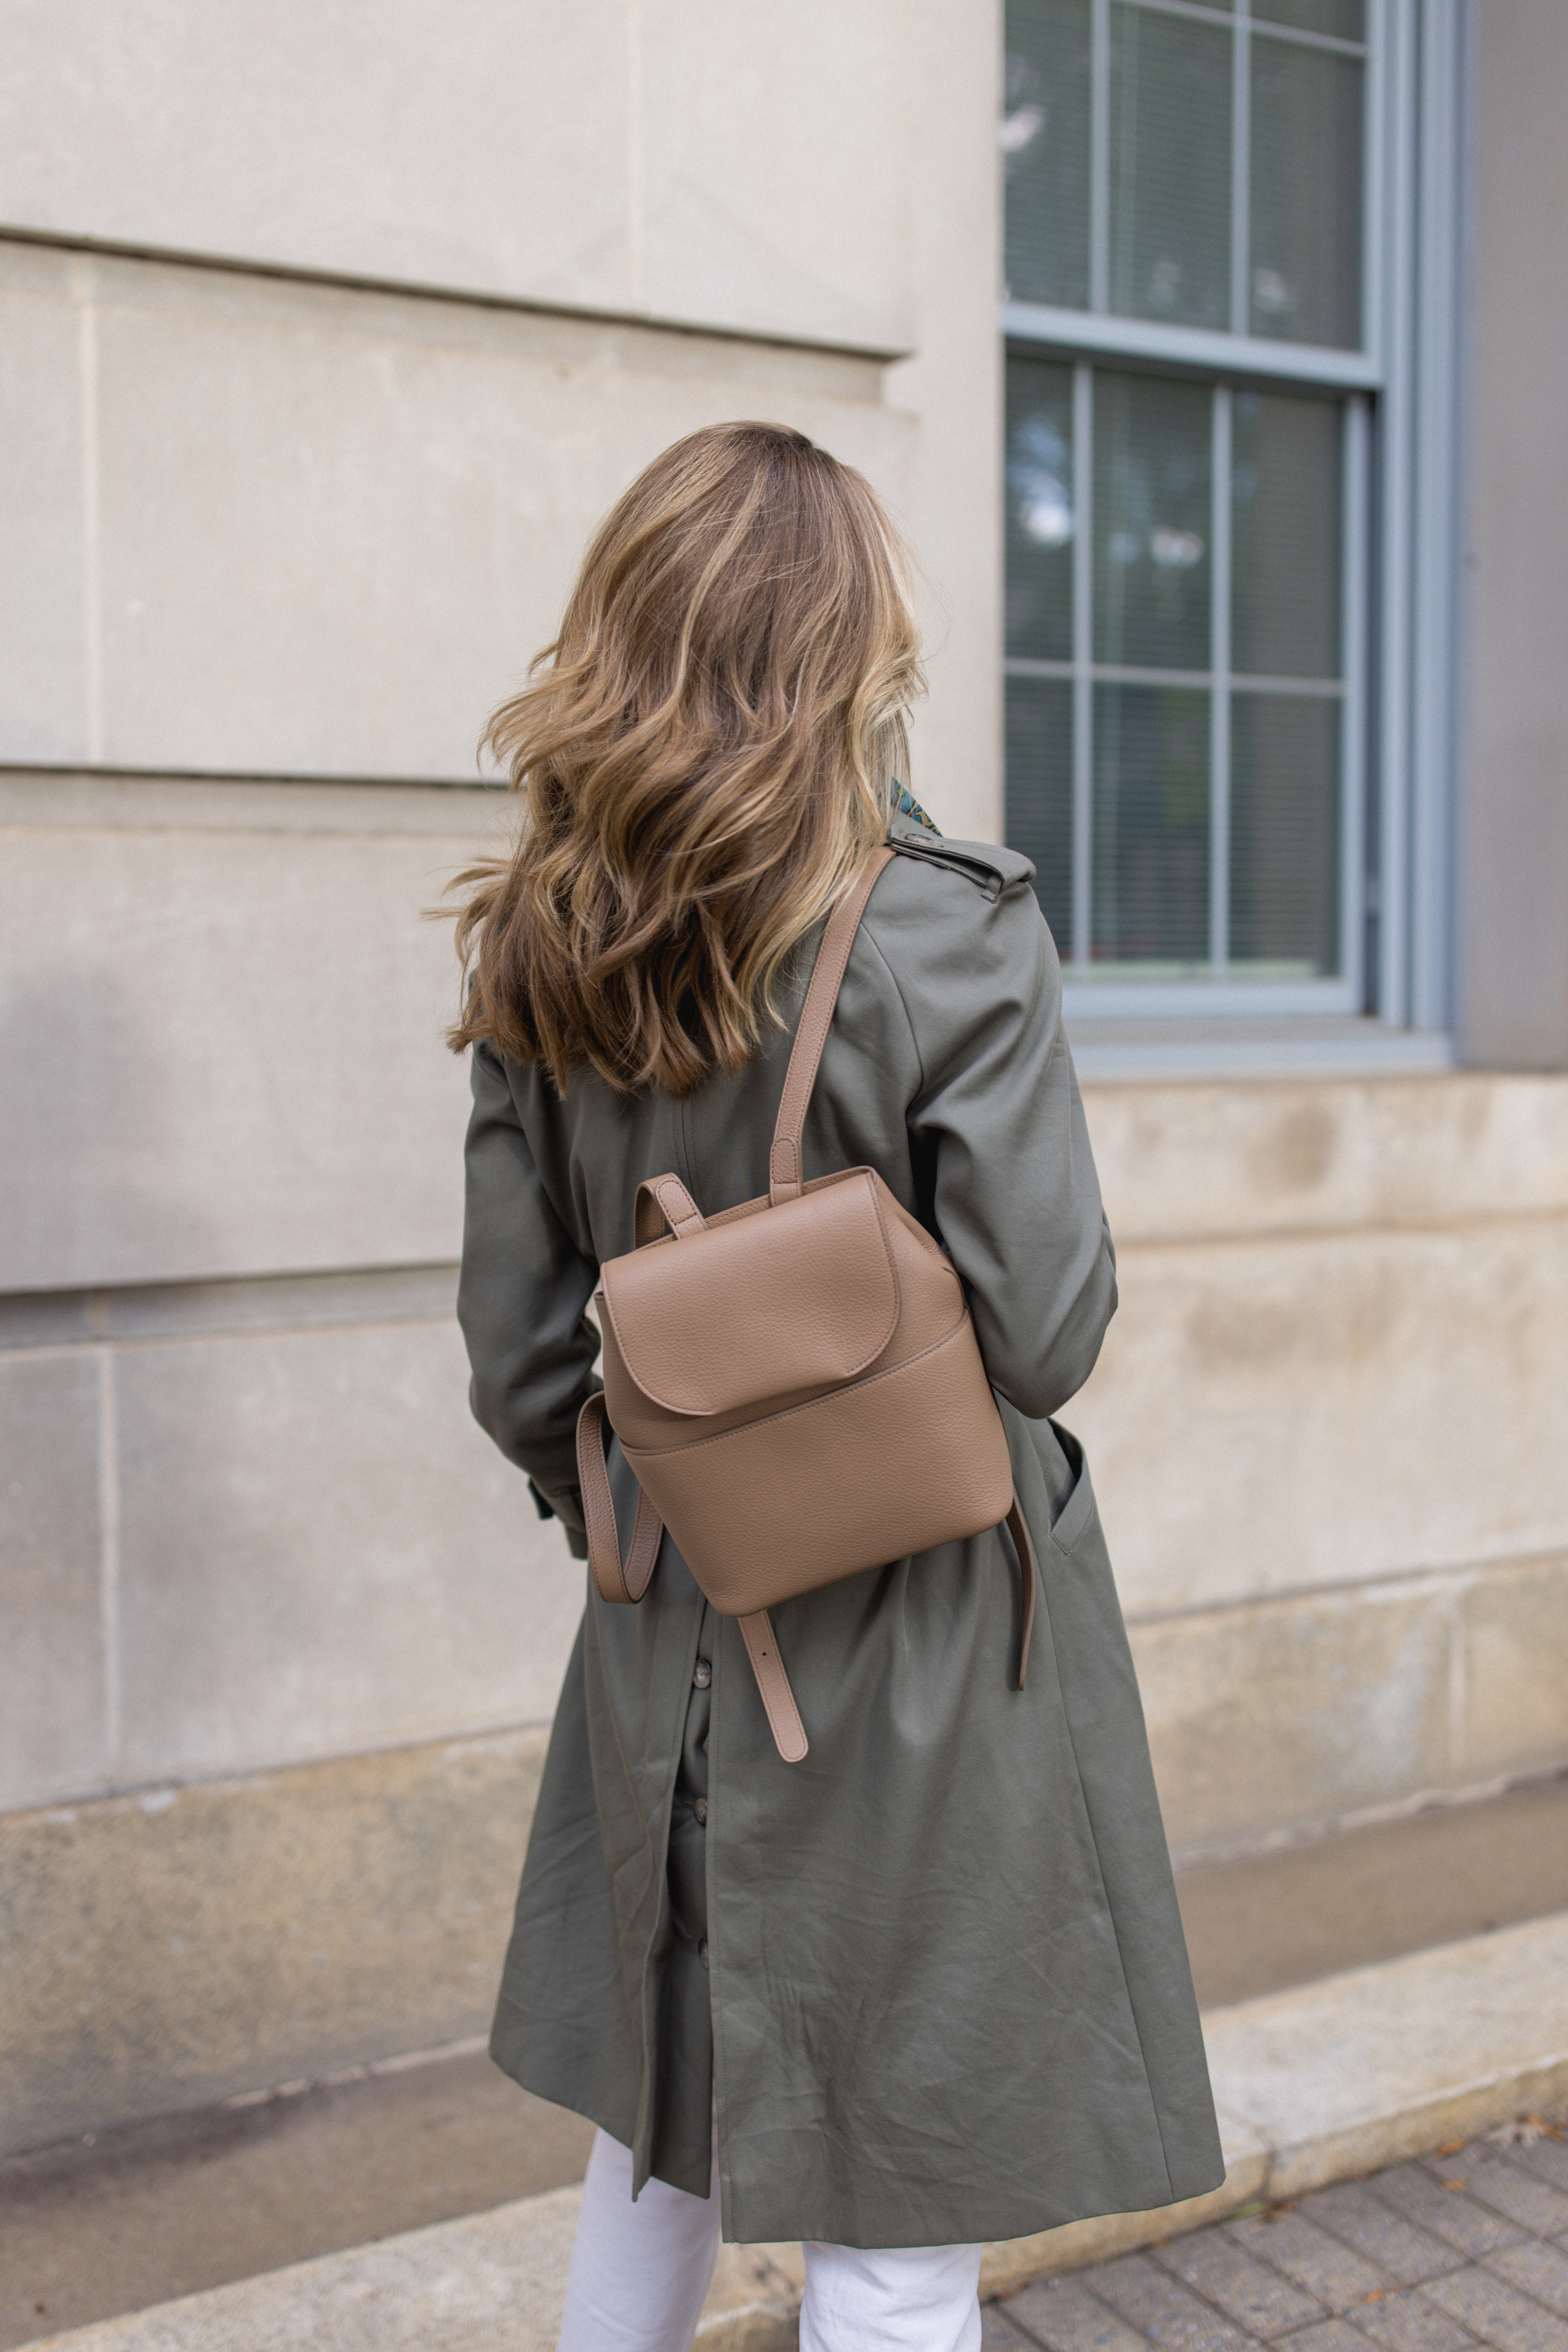 My Honest Review of the Cuyana Leather Backpack